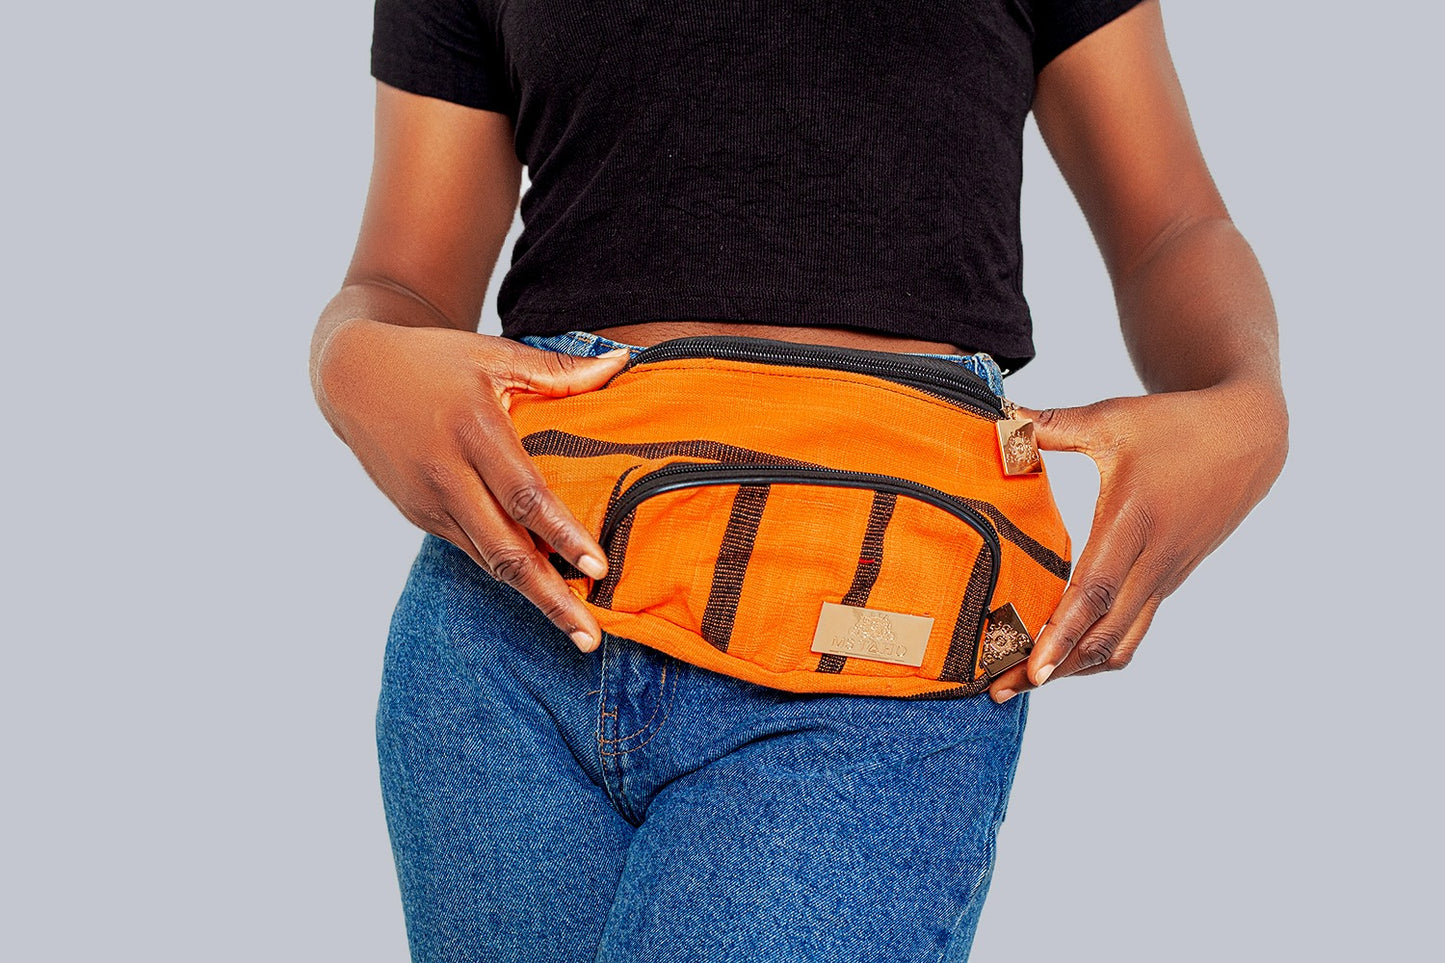 Simone African Prints Fannypack